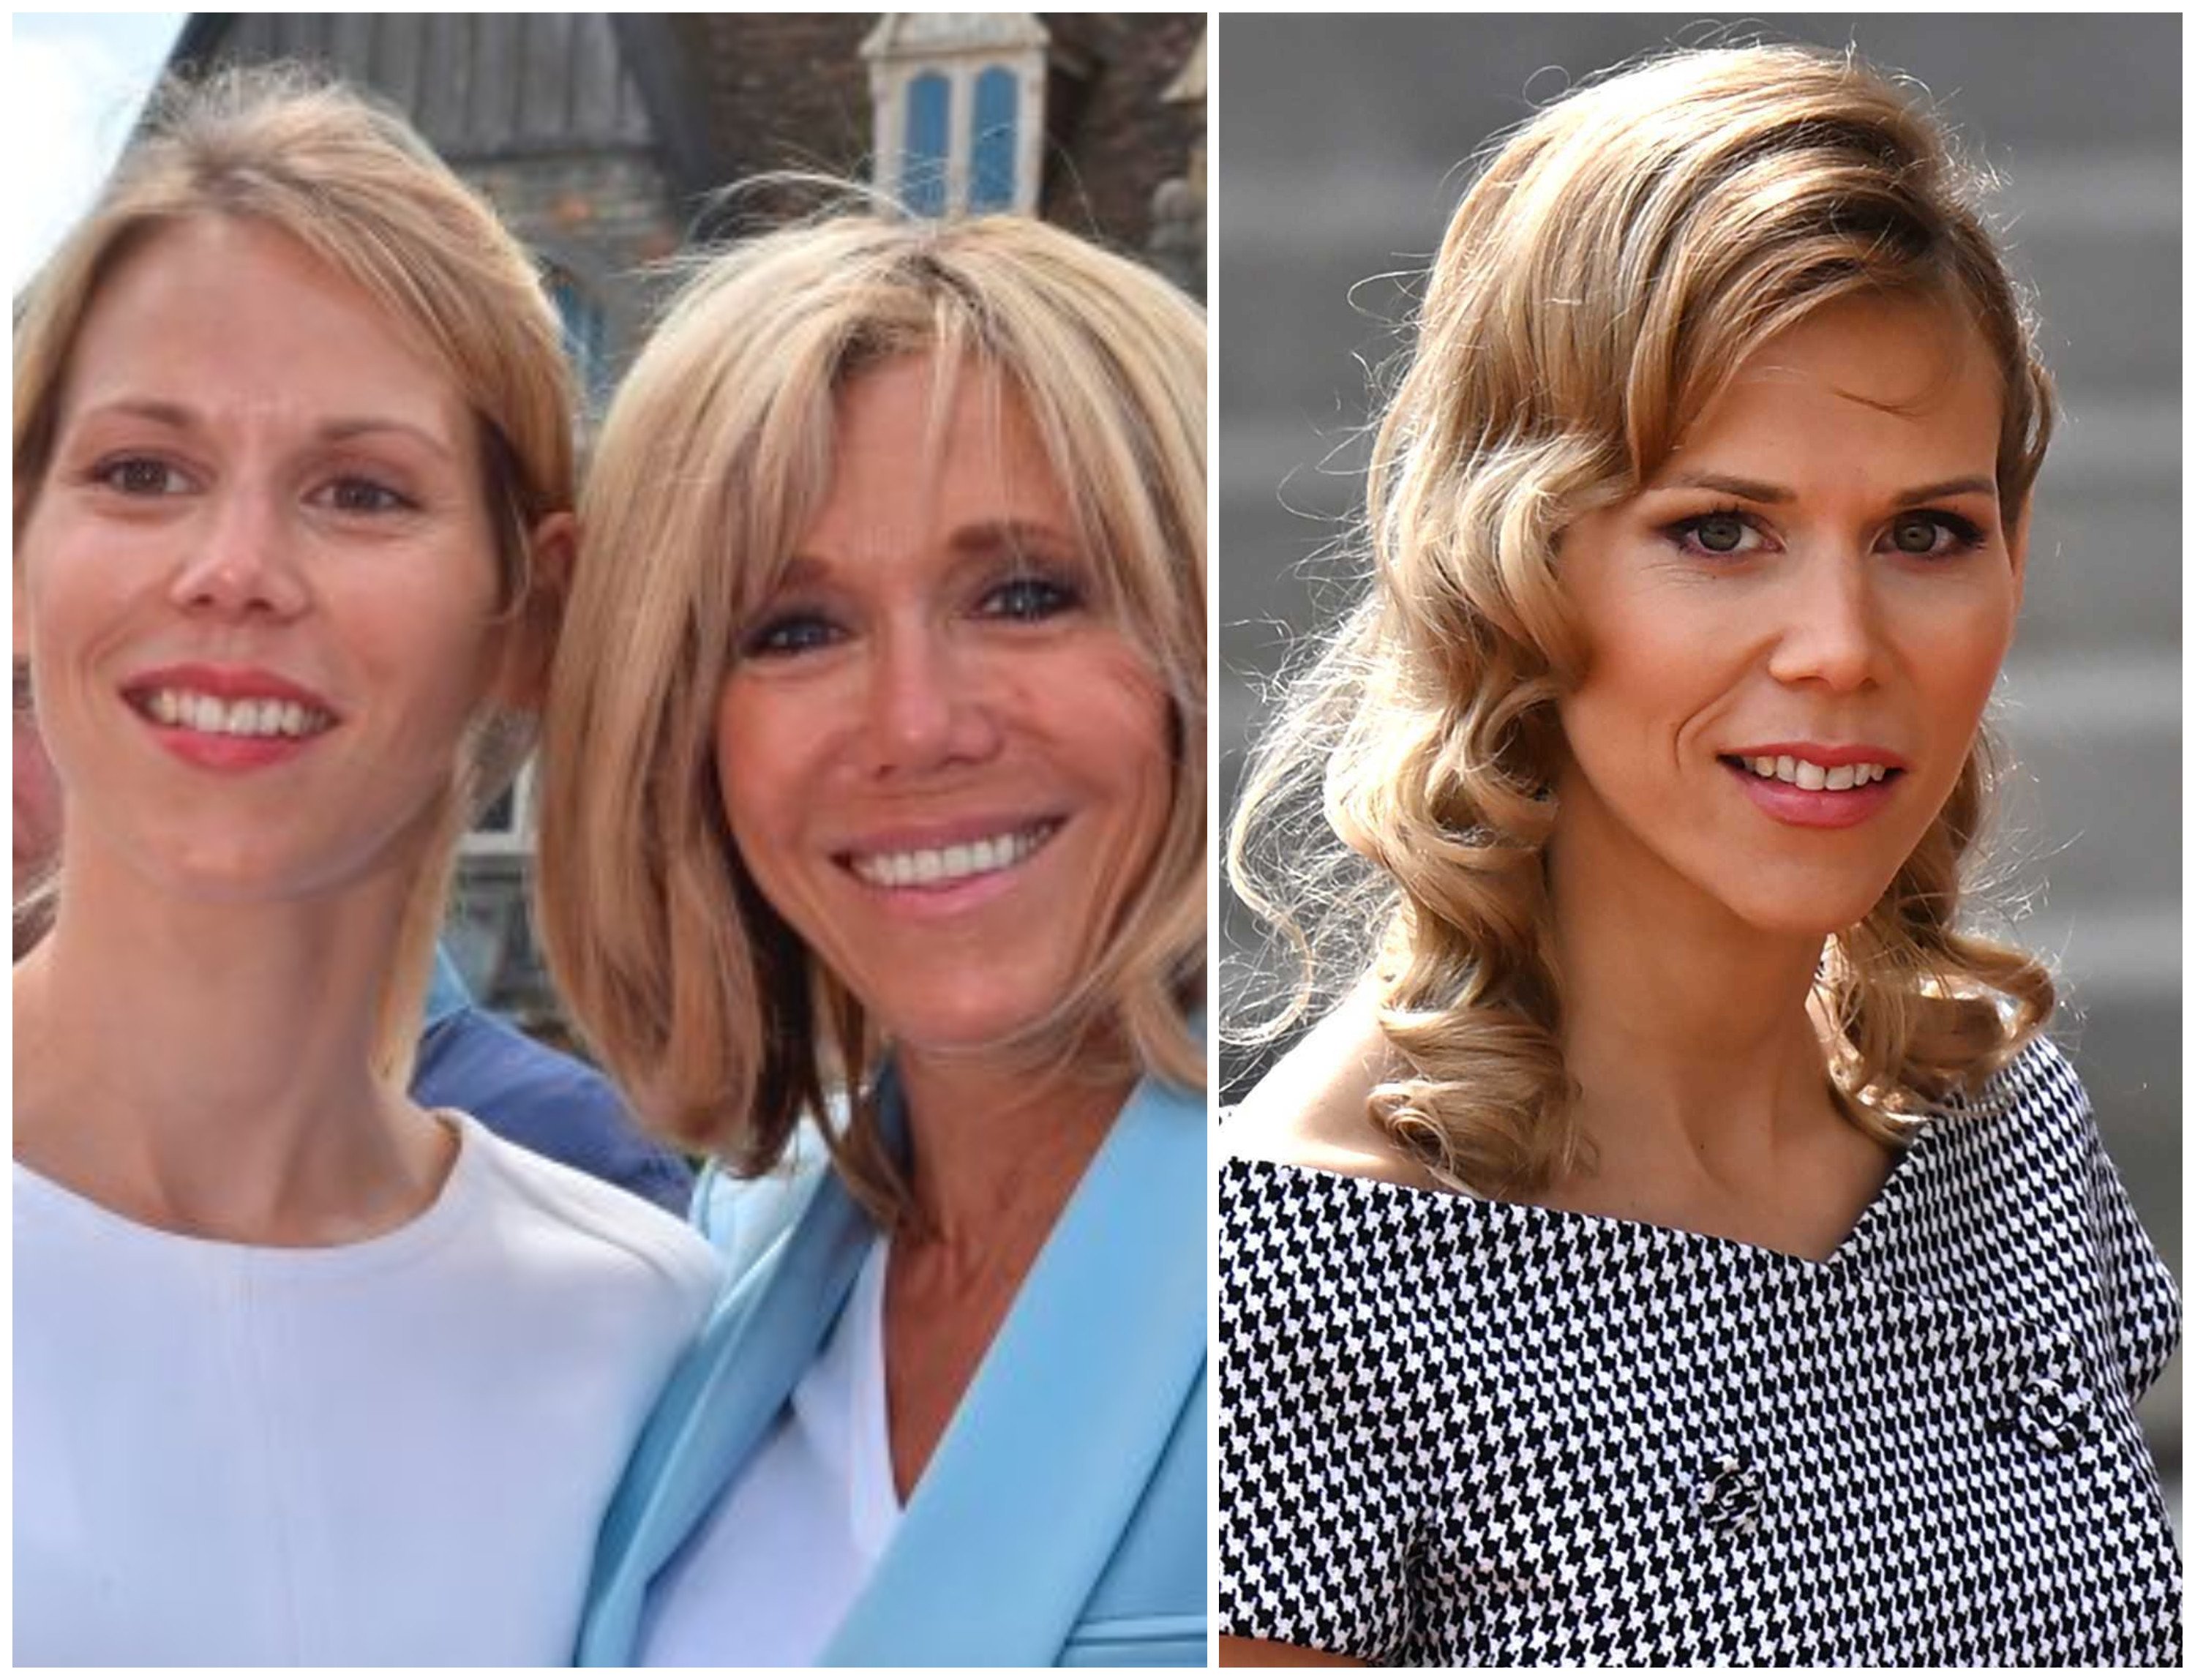 Brigitte Macron’s daughter Tiphaine Auzière often gives interviews defending her mother, who is married to French President Emmanuel Macron. Photos: @WomenintheWorld/X, Getty Images